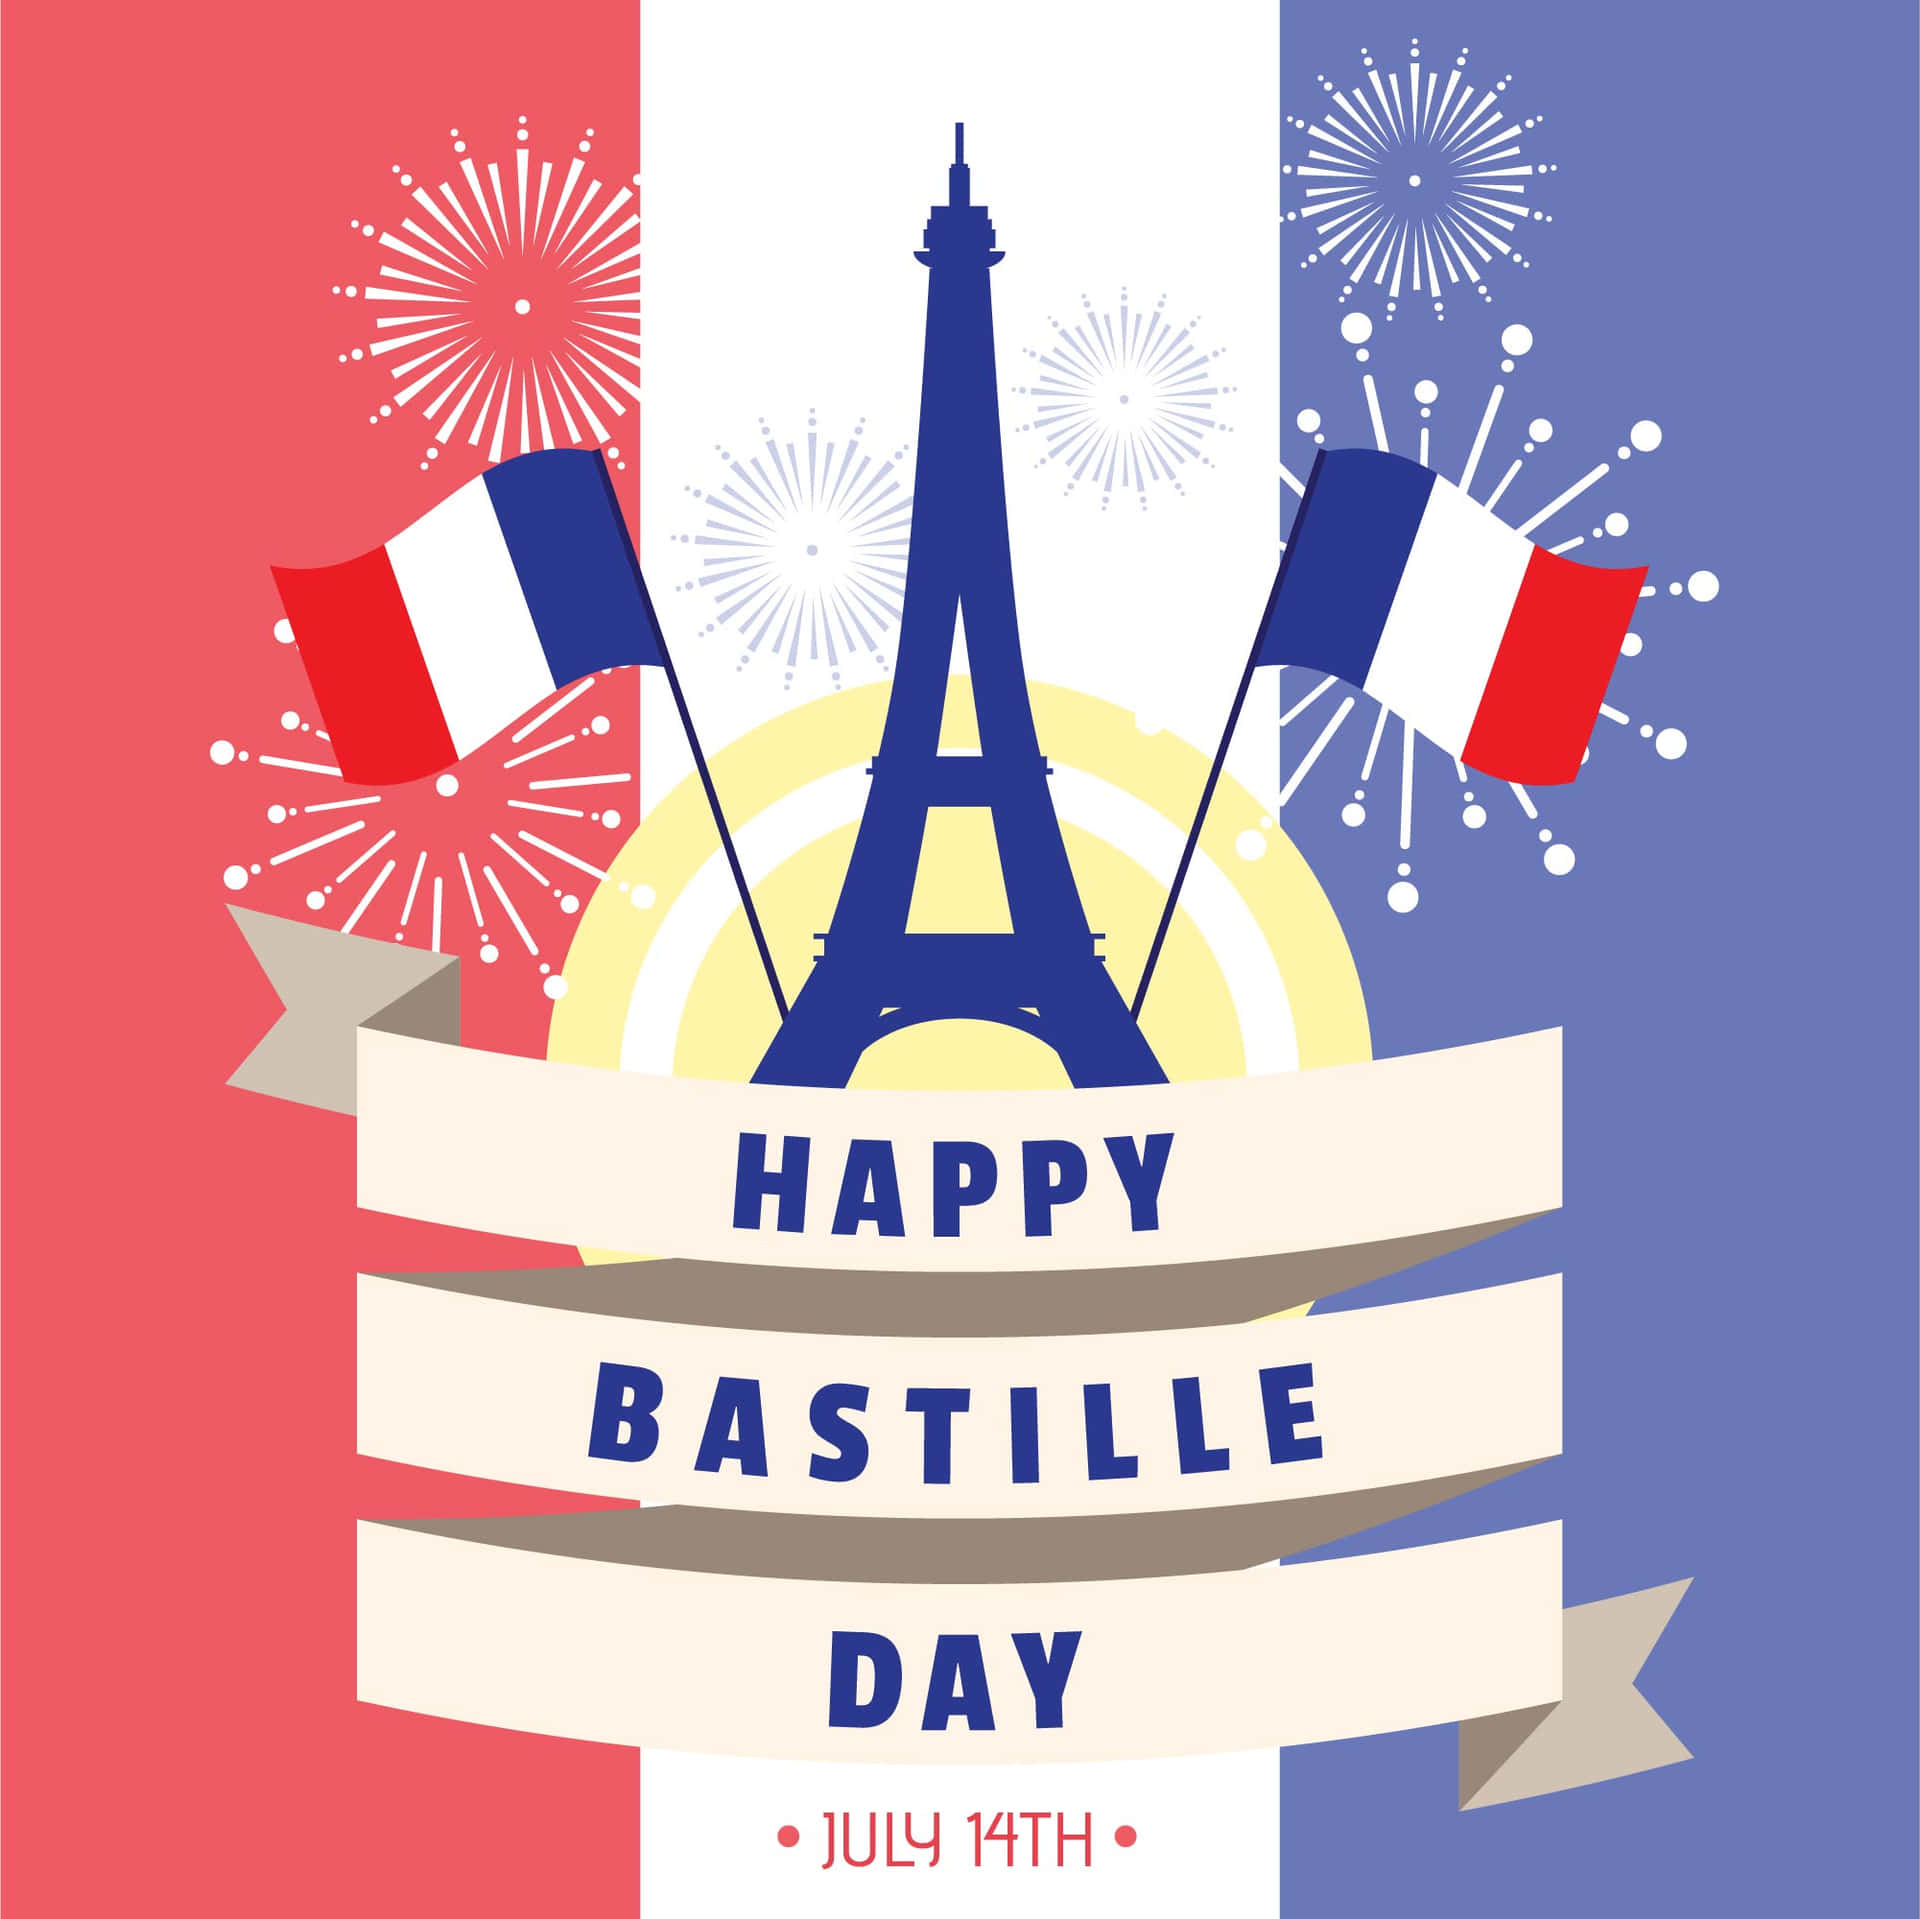 Celebrating Bastille Day With Fireworks At Eiffel Tower Background